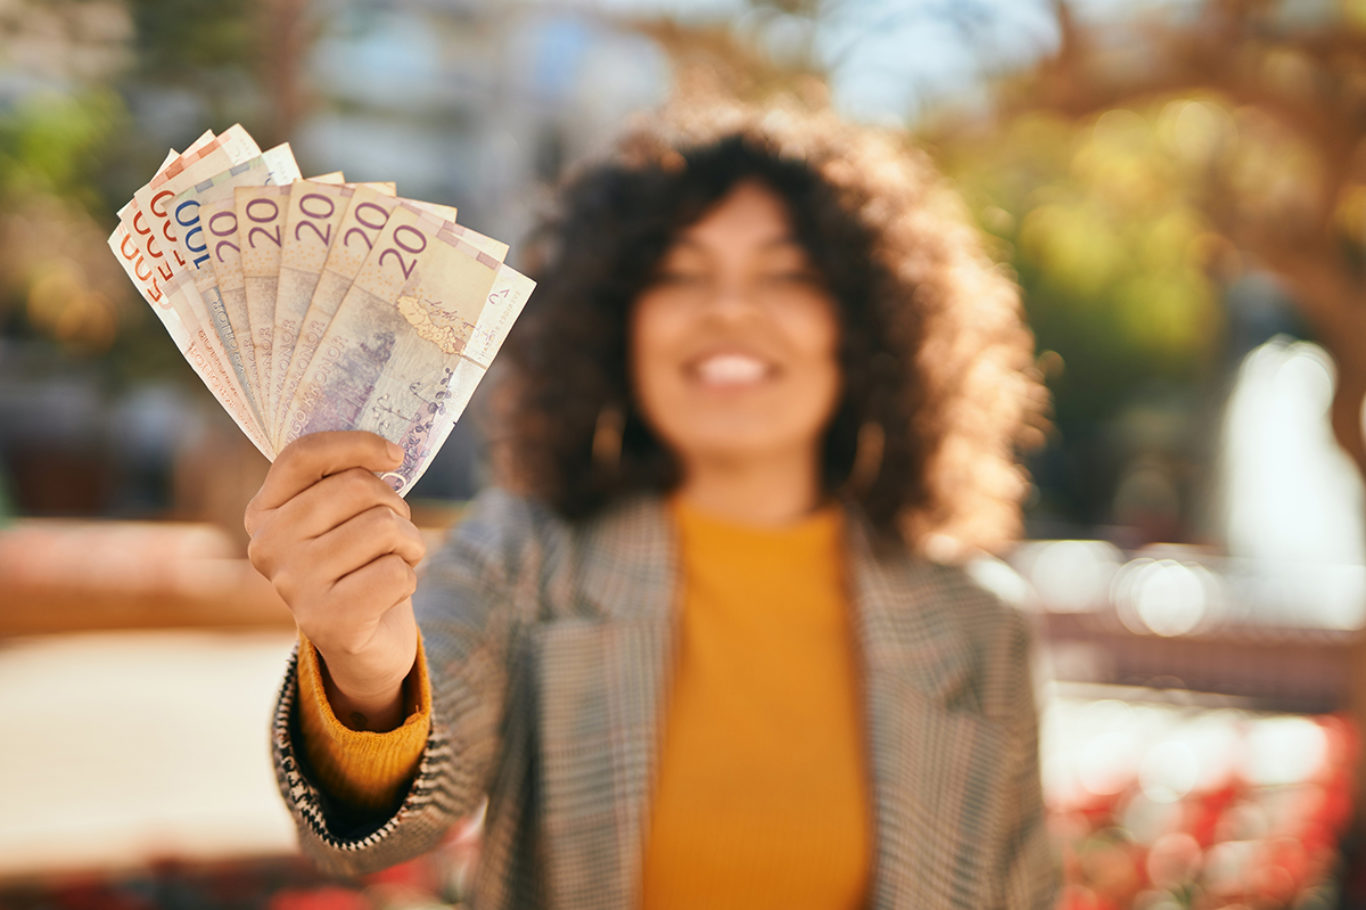 Young hispanic businesswoman smiling happy holding swedish krone banknotes at the city.